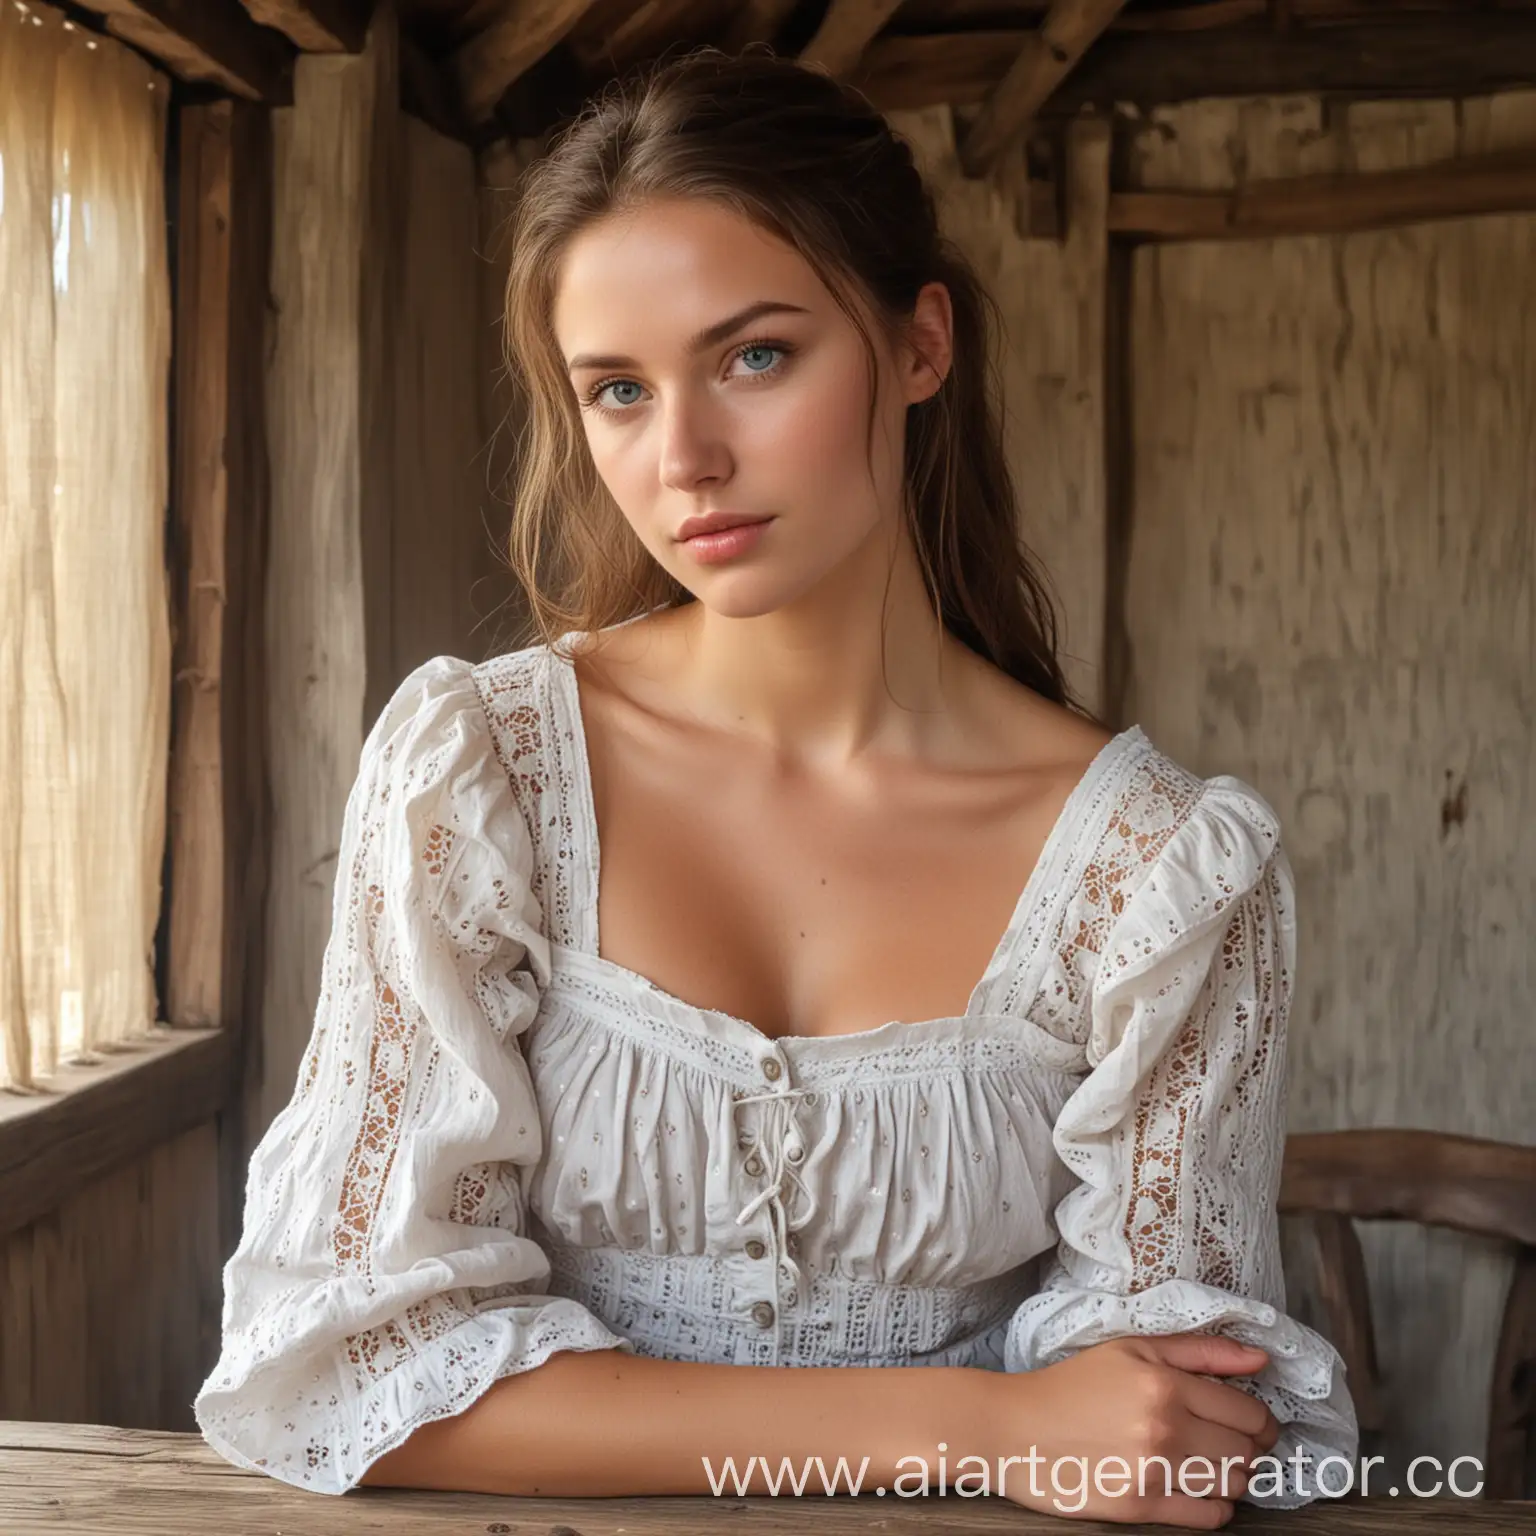 very beautiful young woman, Scandinavian young woman, plump young woman, plump young woman, young peasant woman, body fully visible, the chest is completely visible, A young peasant woman is sitting at a table in a very shabby hut, broad shoulders, strong shoulders, strong shoulders, wide back, strong back, strong back, strong arms, strong arms, very beautiful face, plump face, regular facial features, correct face shape, intelligent face, very beautiful eyes, sky blue eyes, intelligent eyes, intelligent gaze, wide cheekbones, wide jaw, rounded chin, sensual mouth, sensual lips, long hair, dressed in a simple dress, peasant dress, lace-up dress, deep neckline, open shoulders, ultra quality, ultra detail, high resolution,